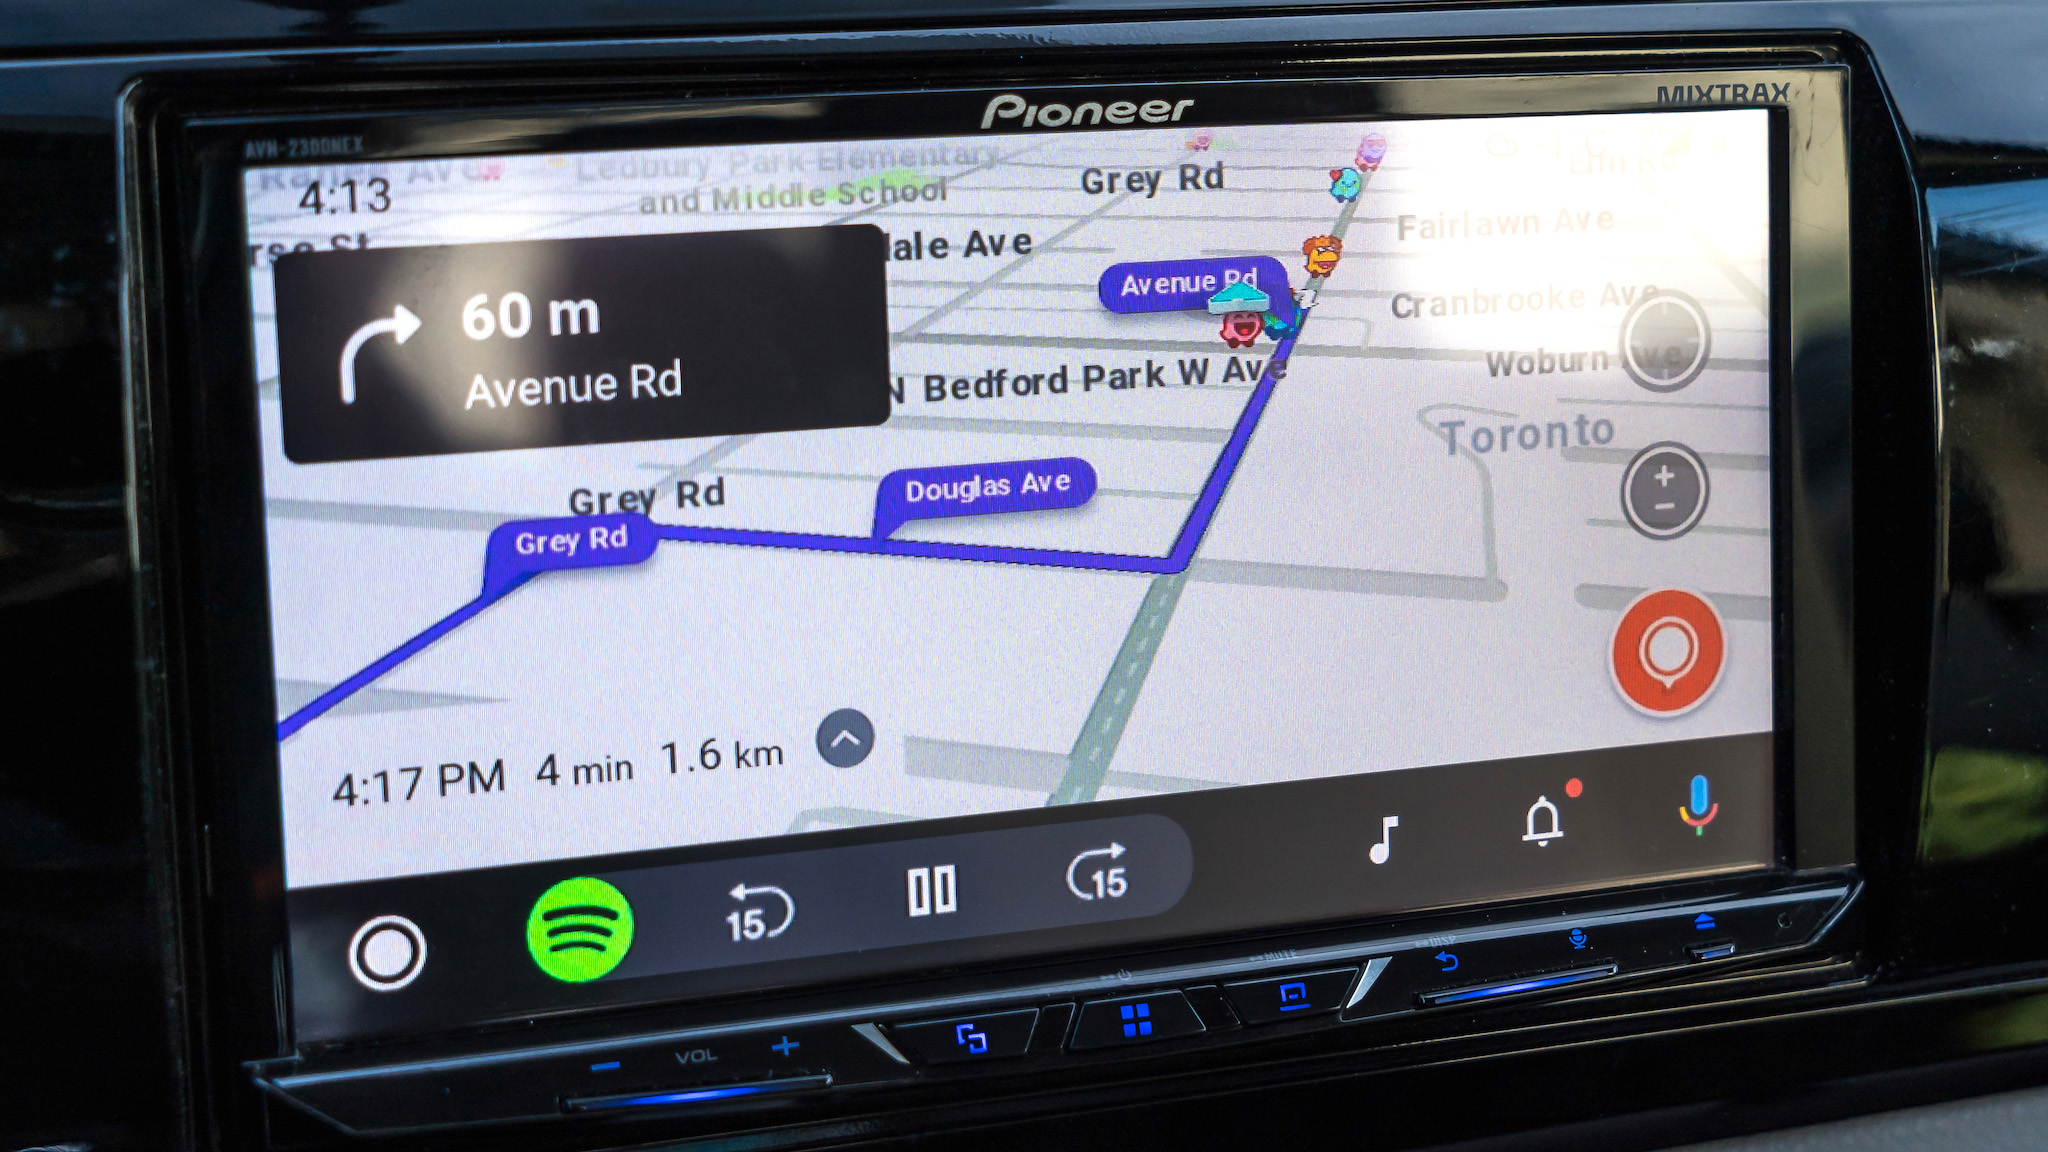 Showing a route in Waze on Android Auto.